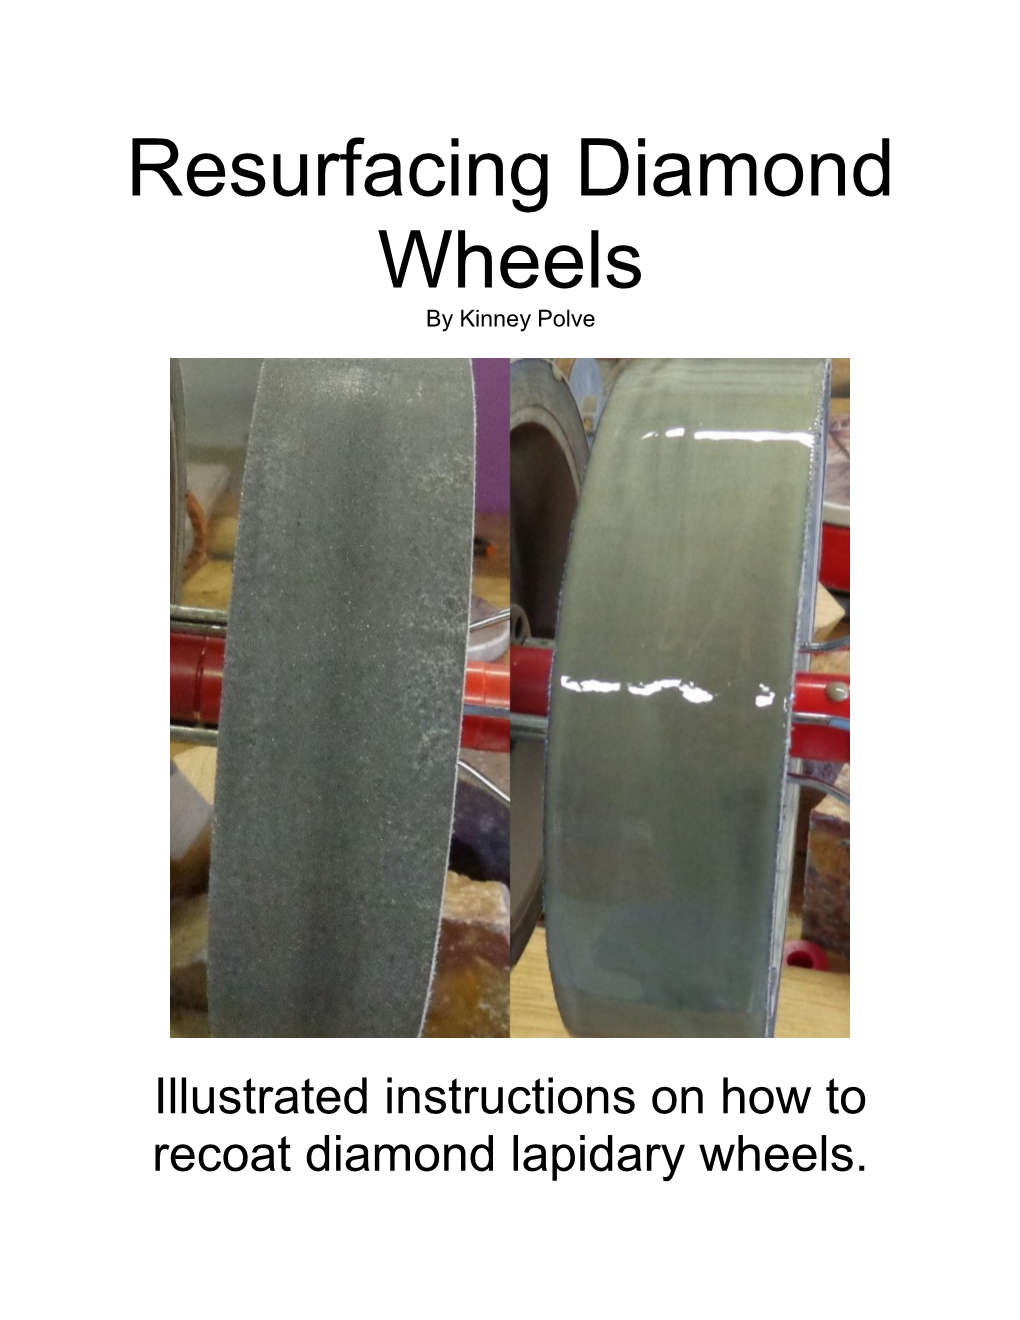 Illustrated Instructions on How to Recoat Diamond Lapidary Wheels